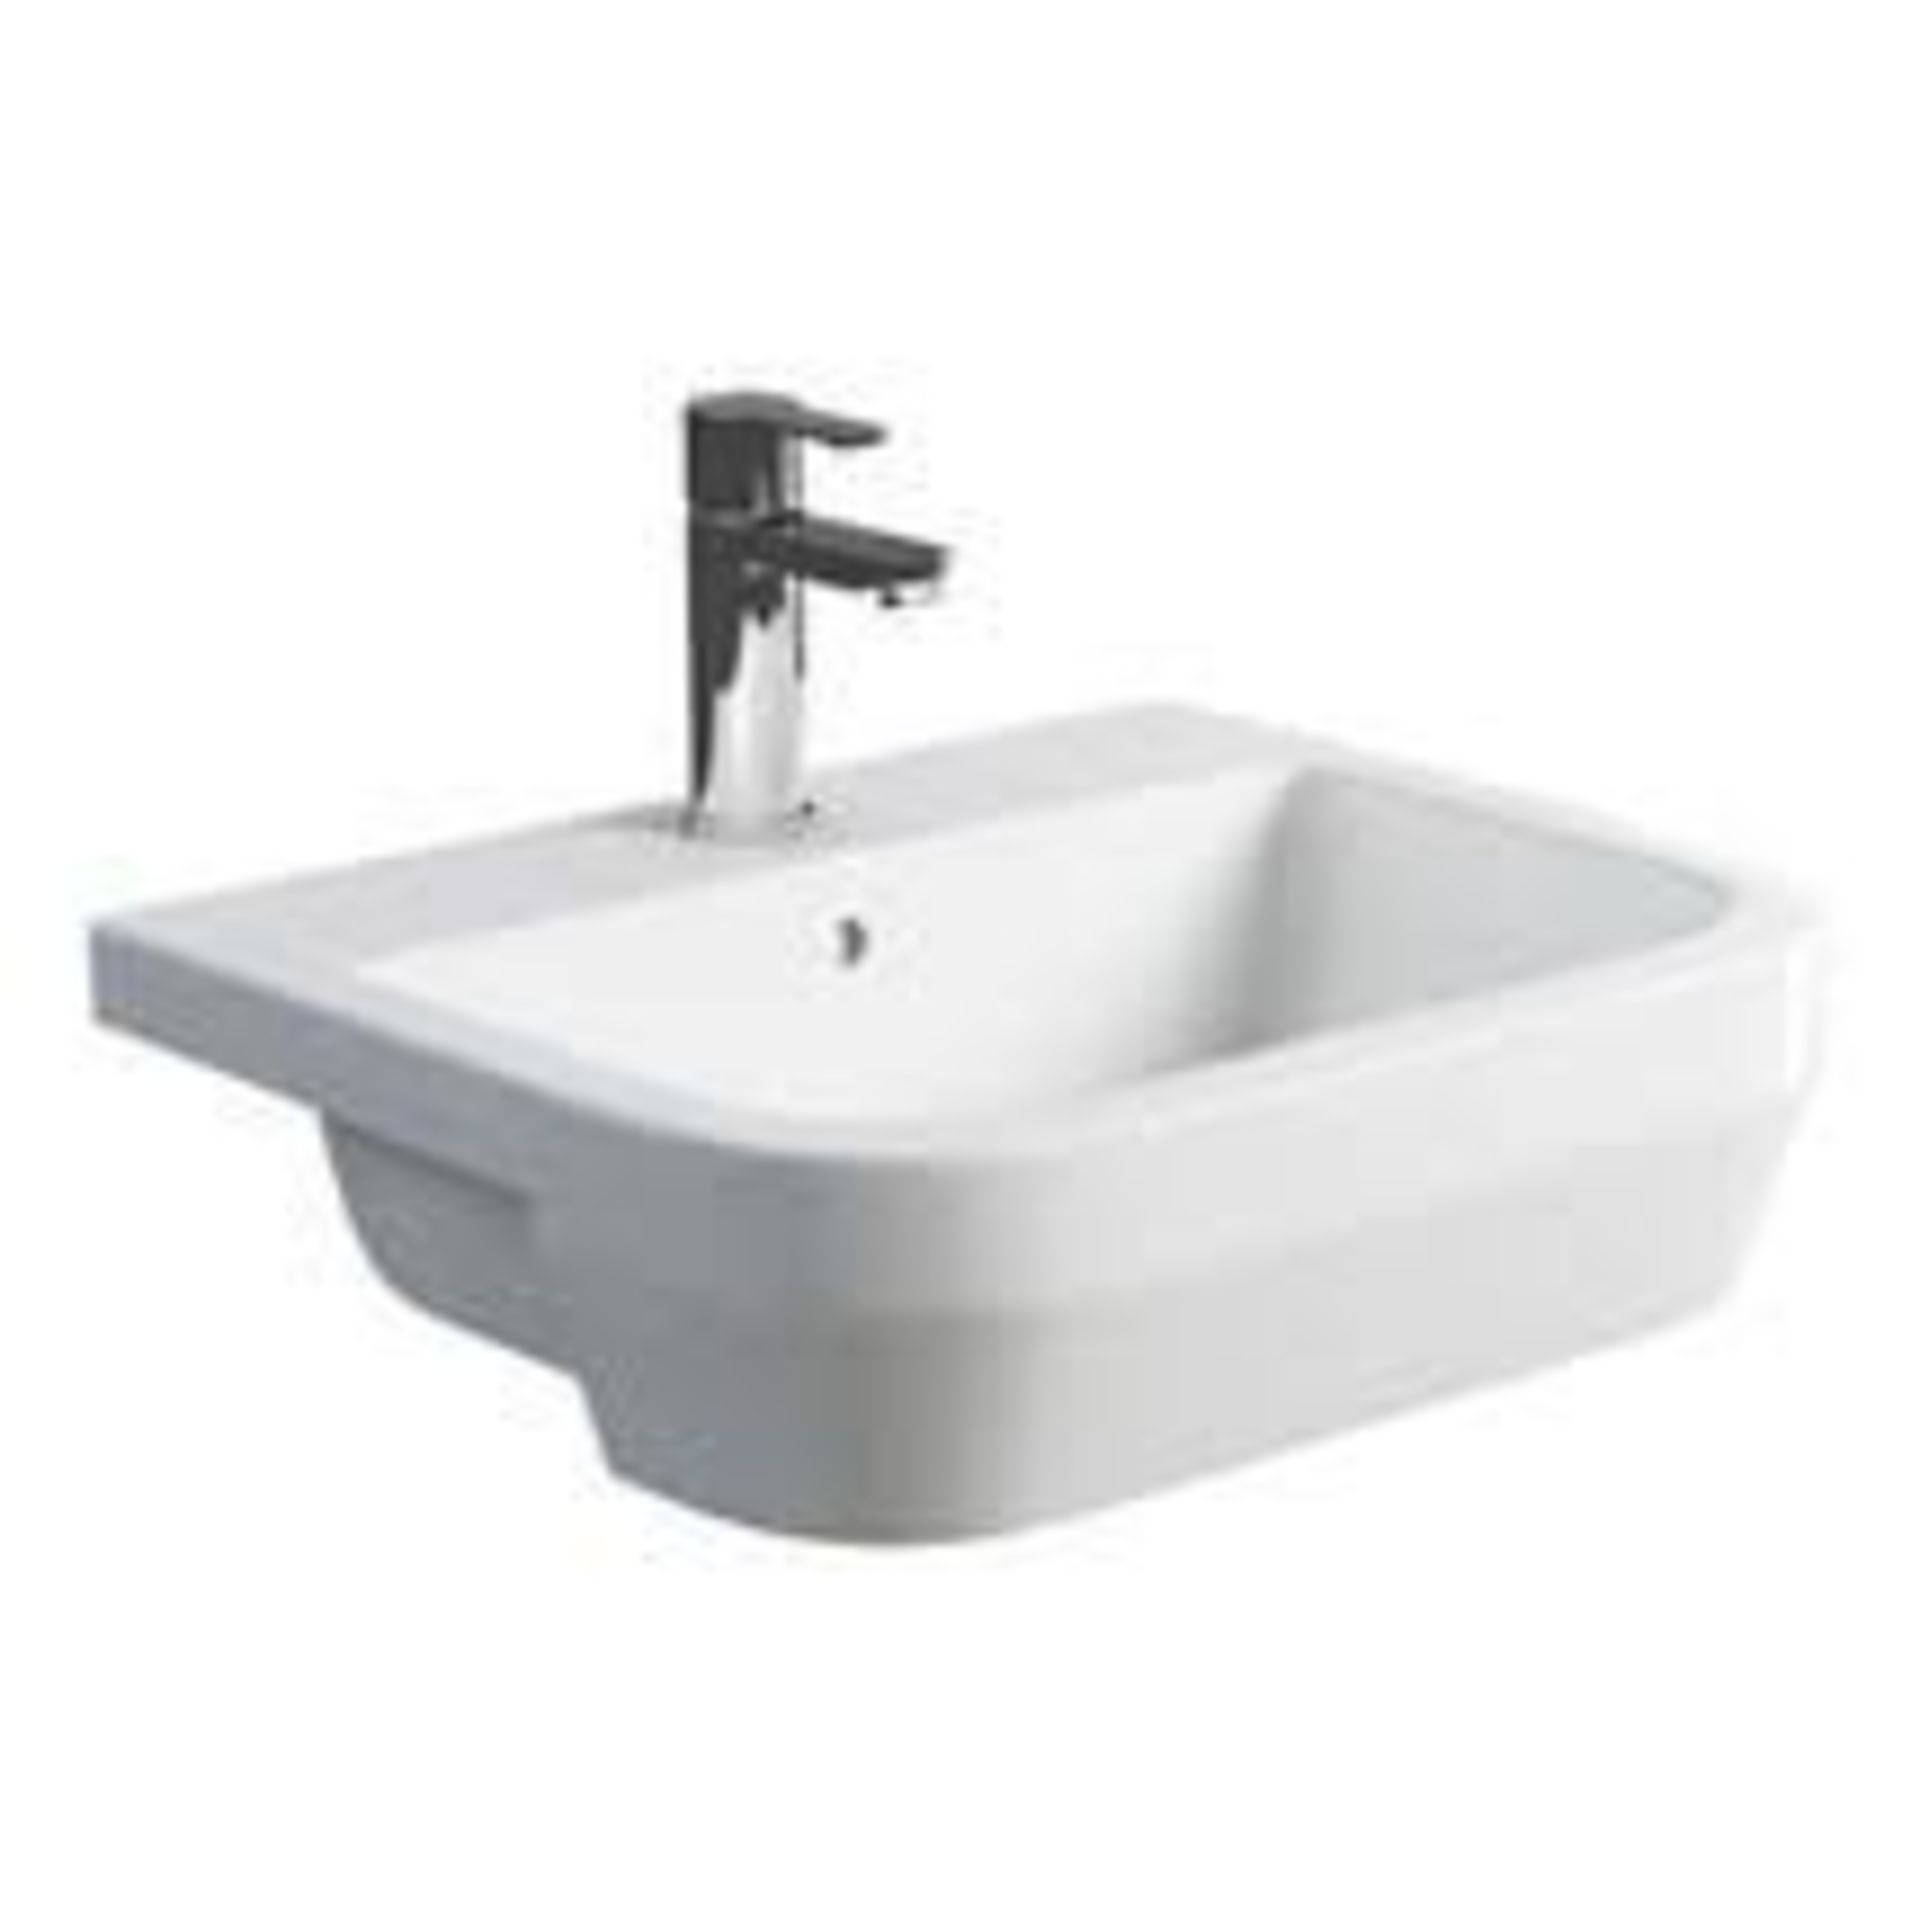 Pallet - 270 - 16 x Phase Short Projection Basin - SKU - 520940 RRP £479.84 - Image 3 of 3